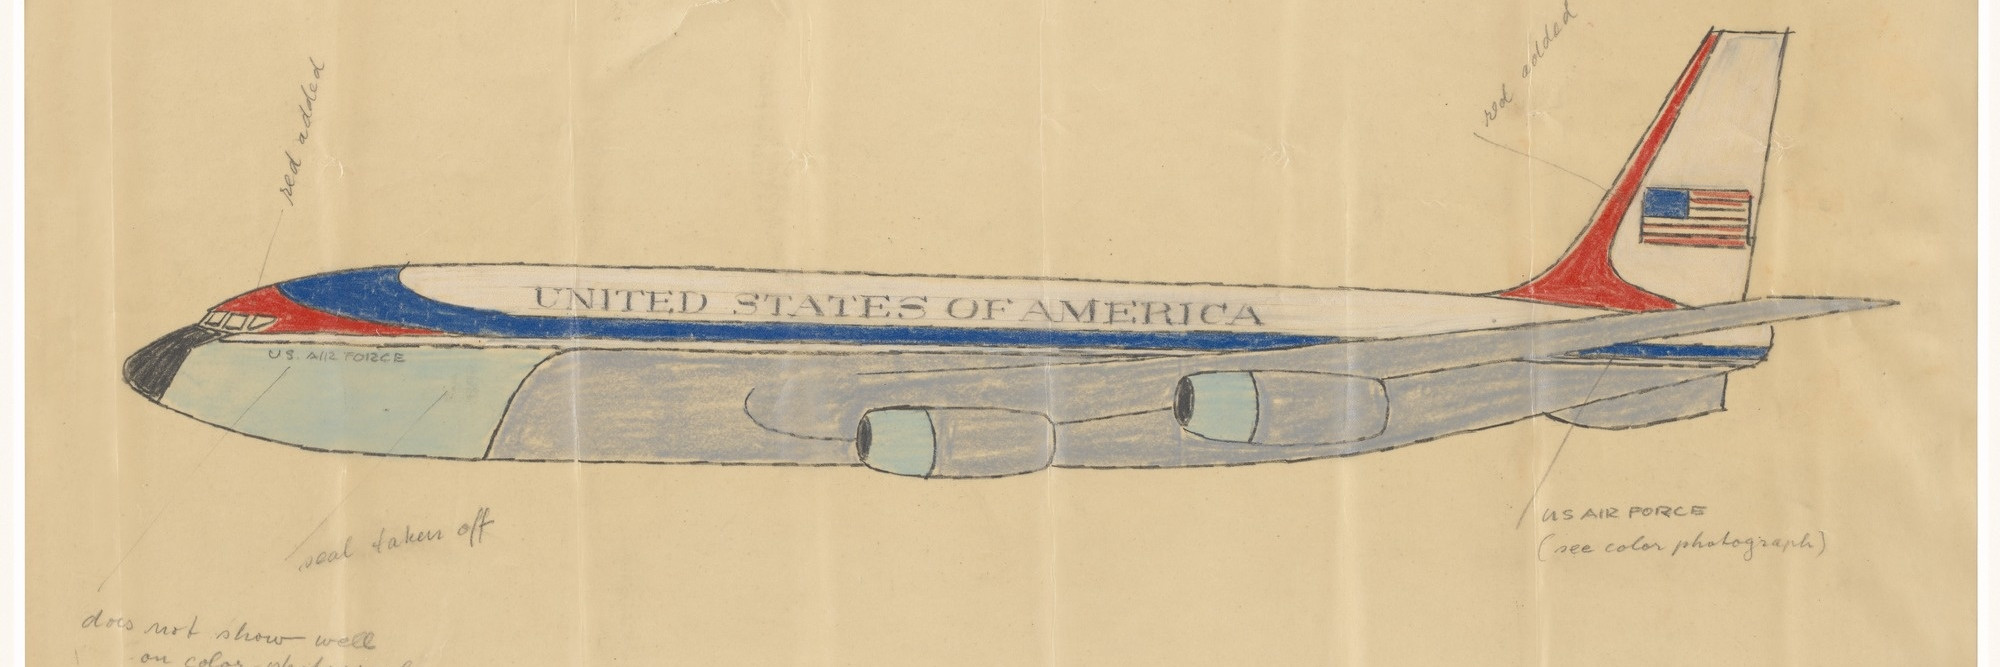 Raymond Loewy. Livery Design for Air Force One. 1962. Gouache, colored pencil, graphite on paper, 10 1/2 × 22″ (26.7 × 55.9 cm). Gift of Jo Carole and Ronald S. Lauder